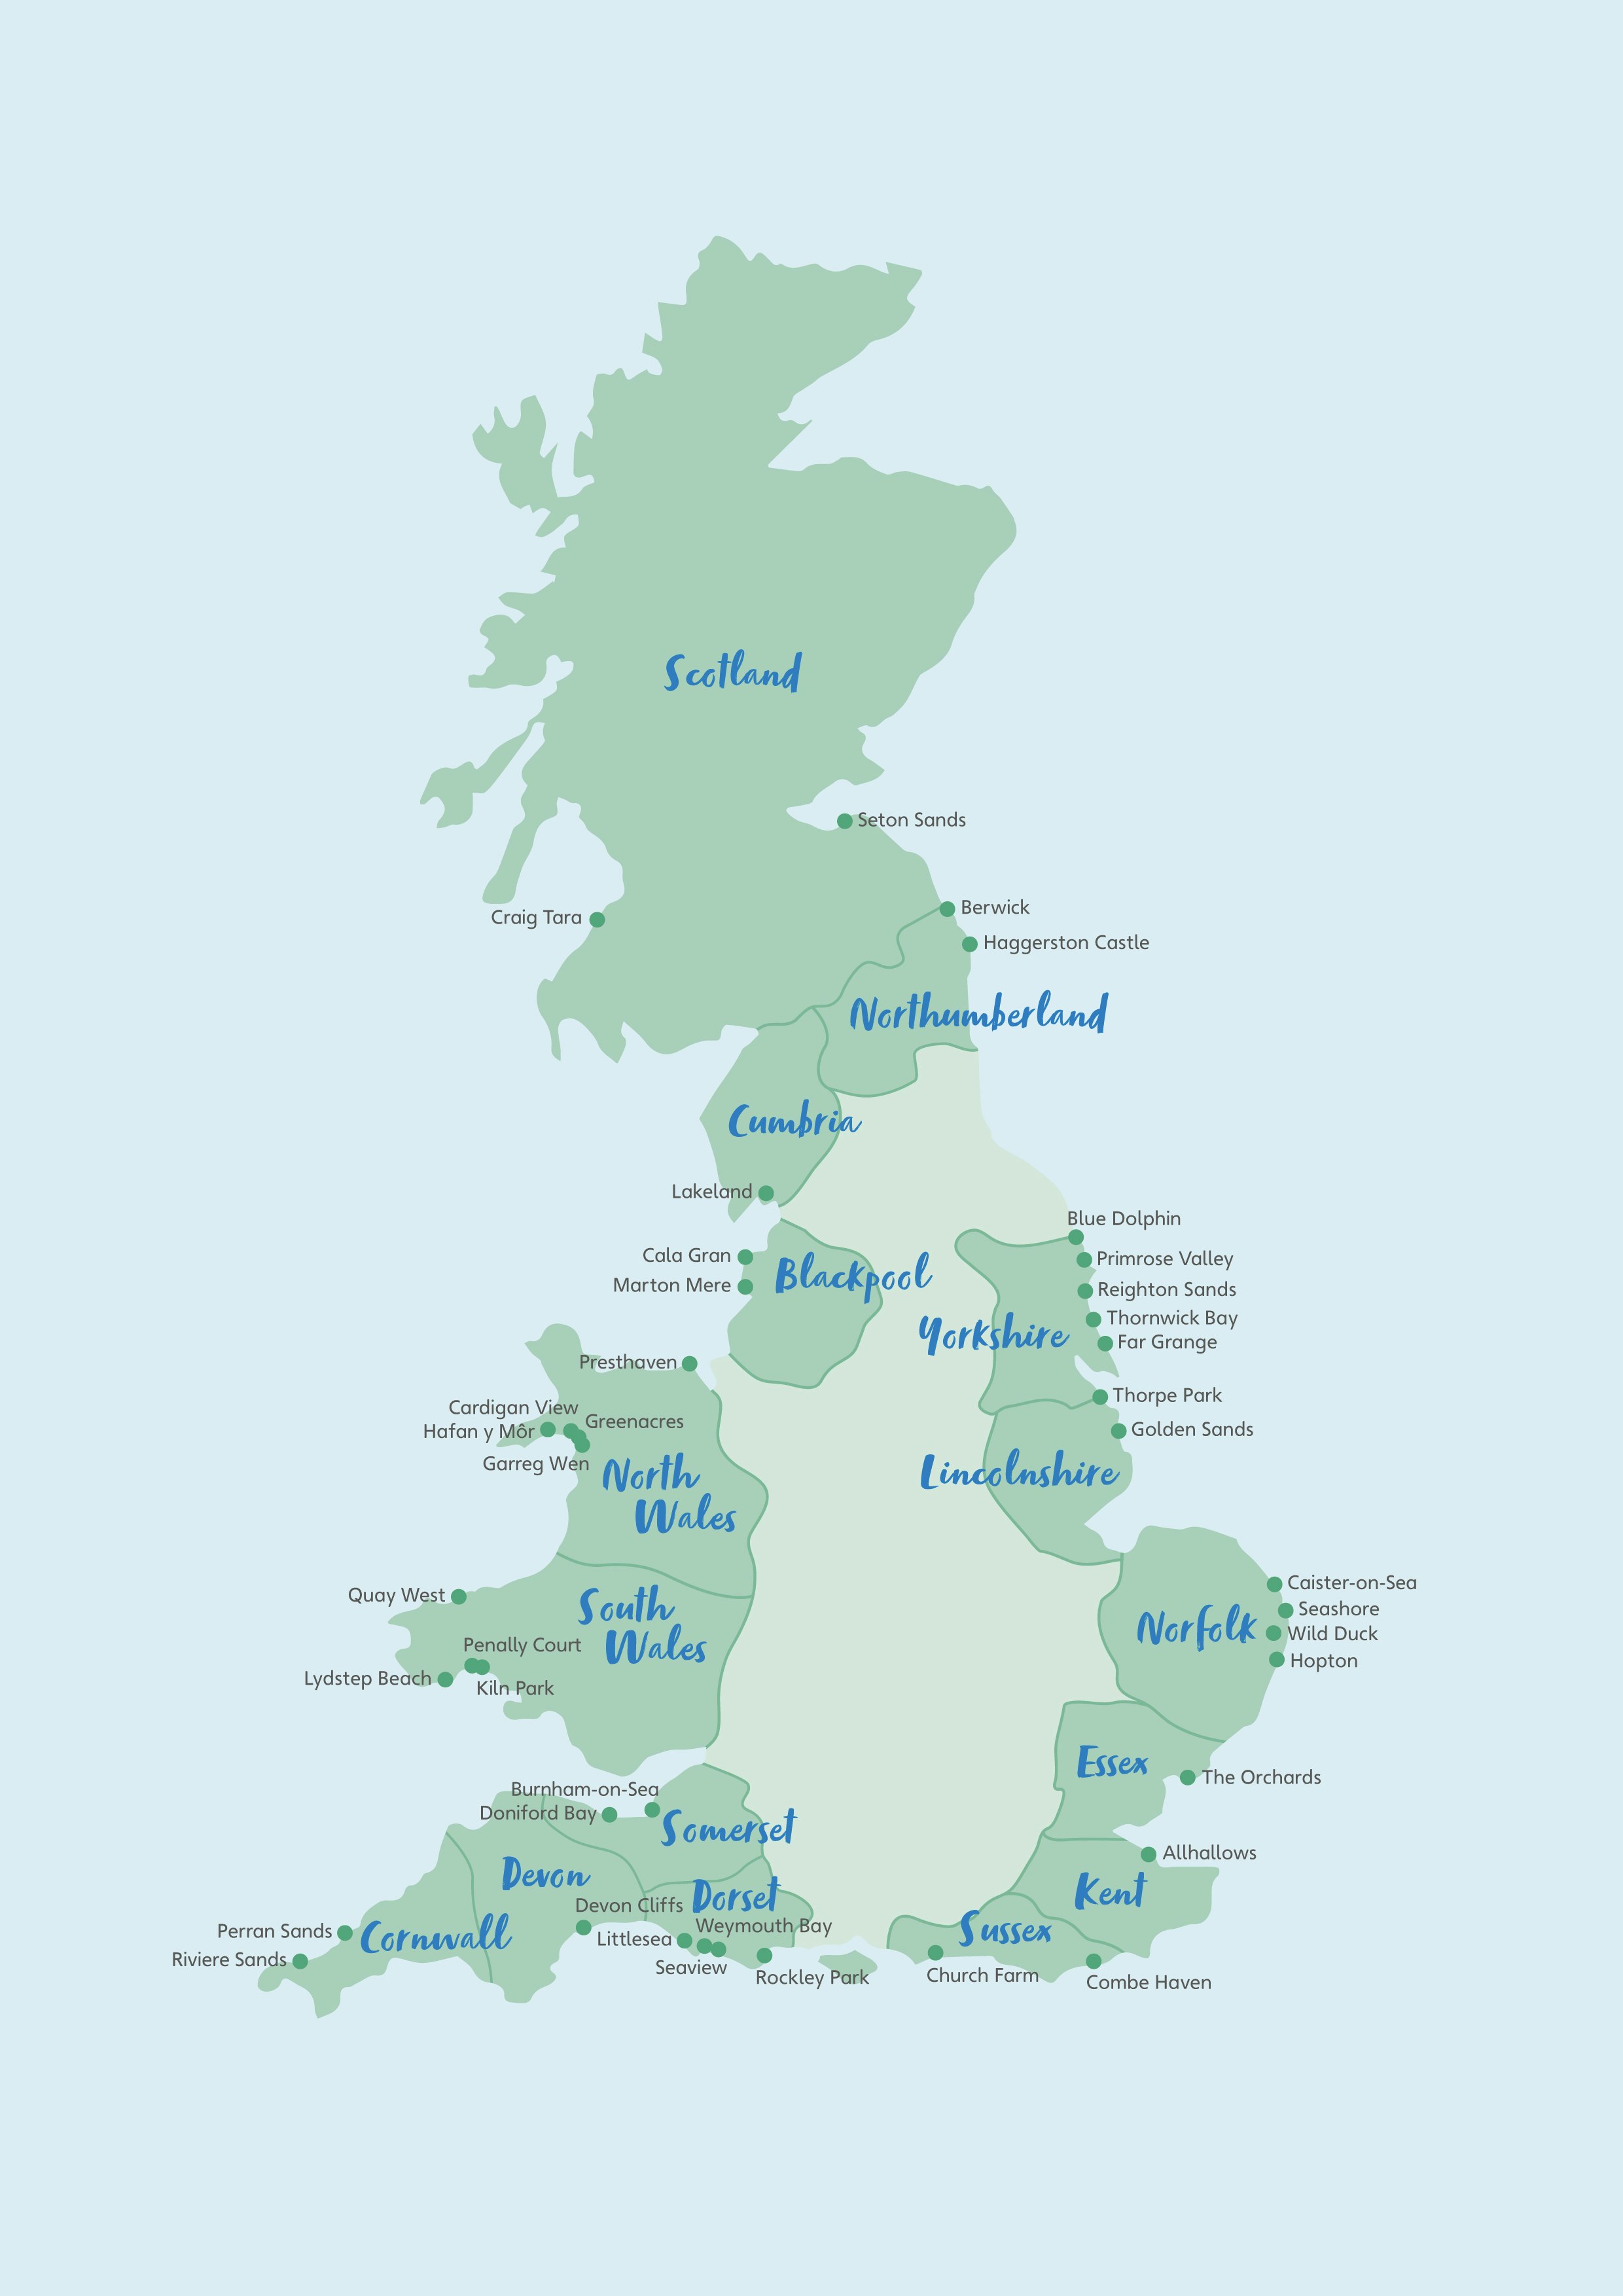 Map of Haven Locations across the UK